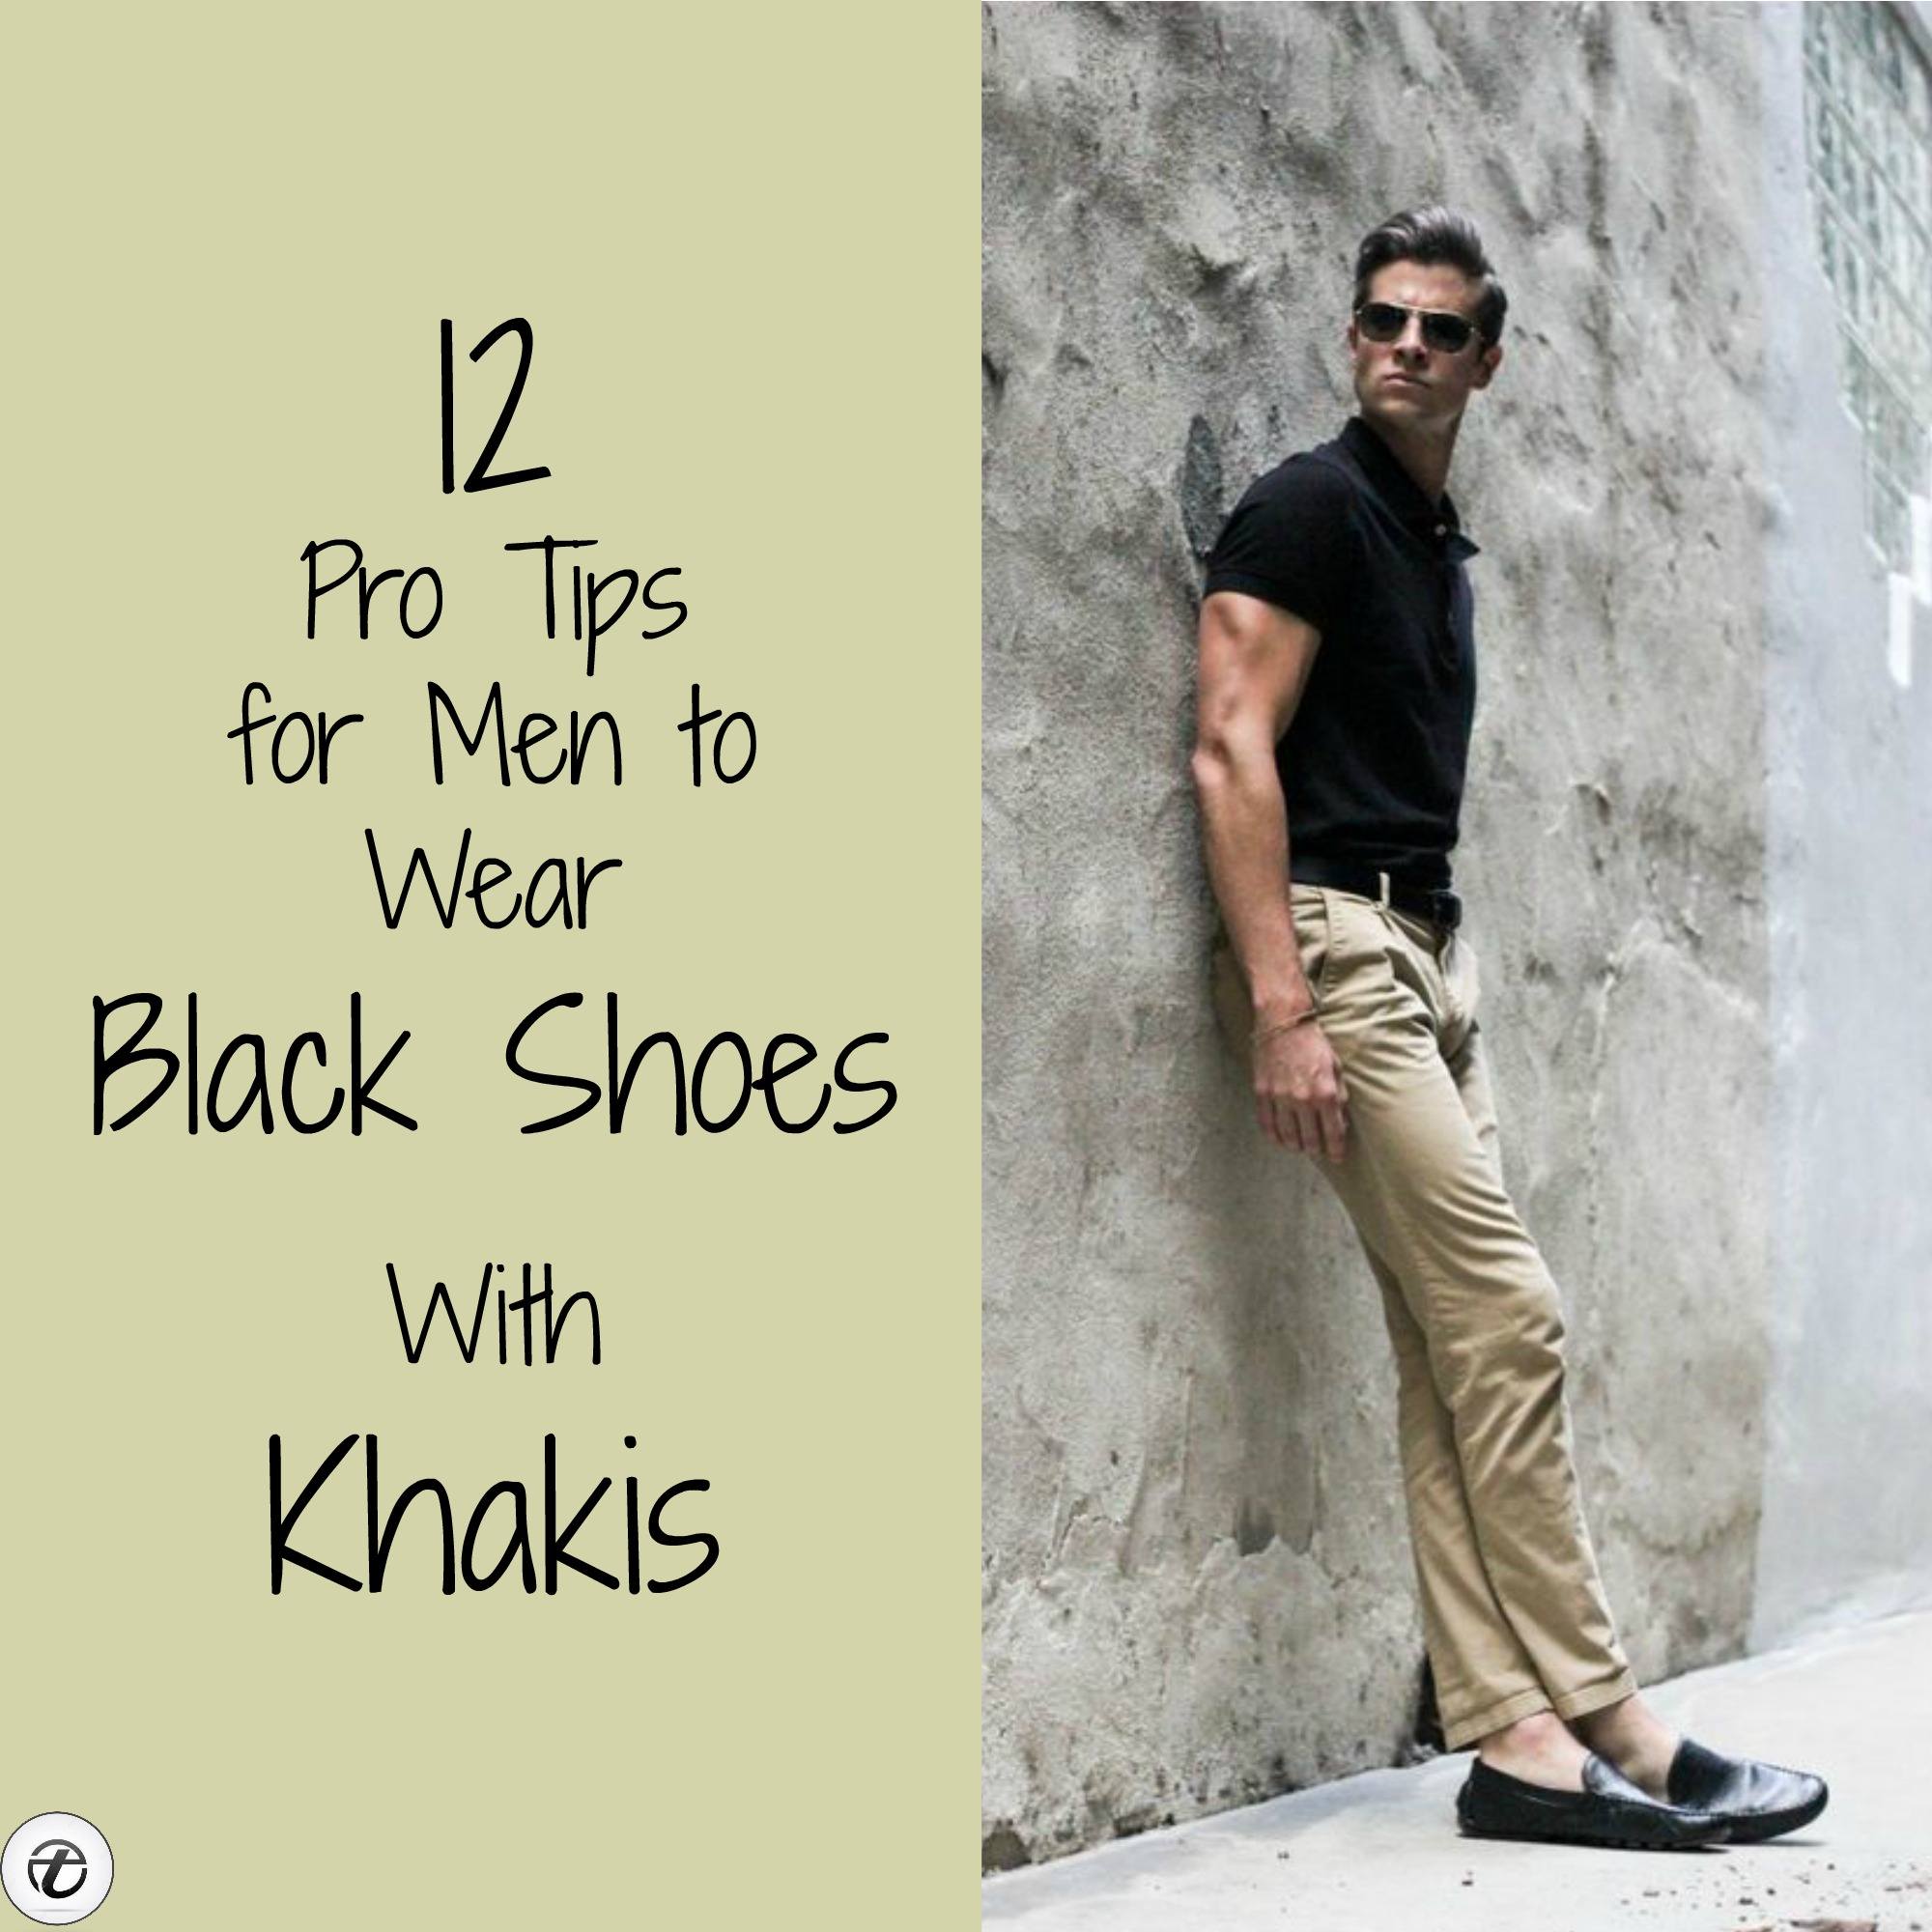 How to Wear Black Shoes With Khaki Pants-12 Pro Tips for Men